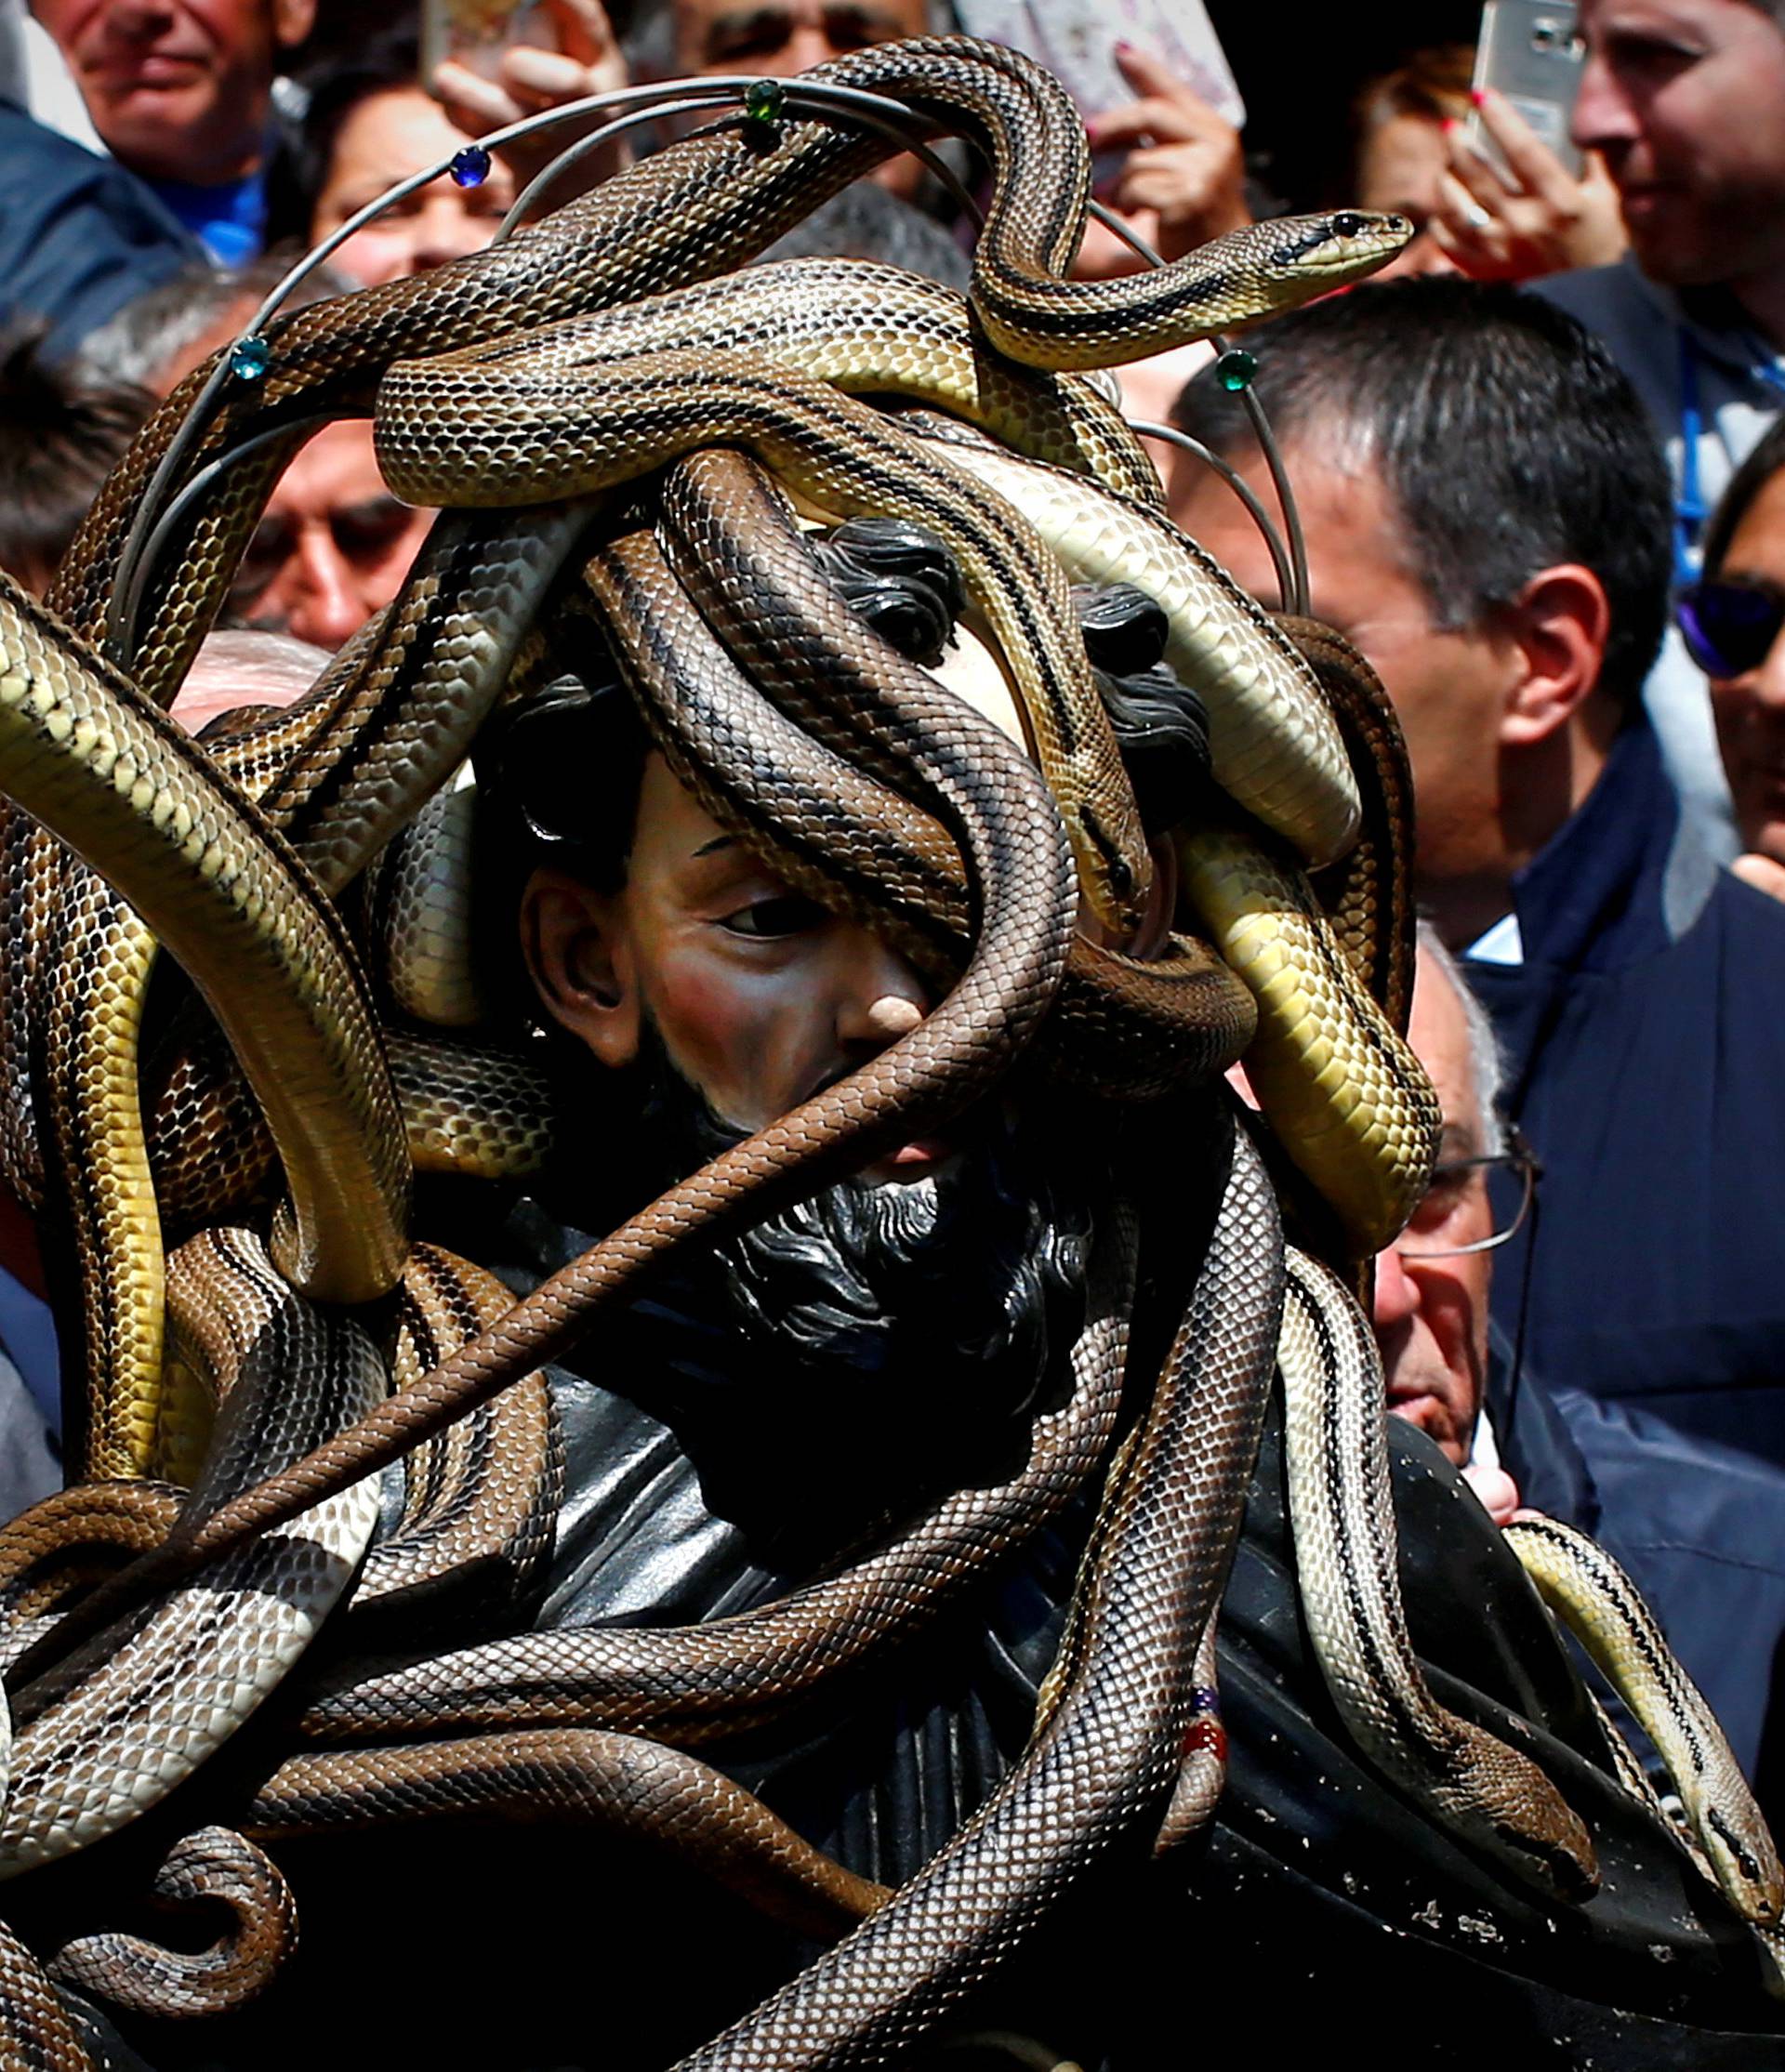 Snakes cover a wooden statue of Saint Domenico during a procession in Cocullo